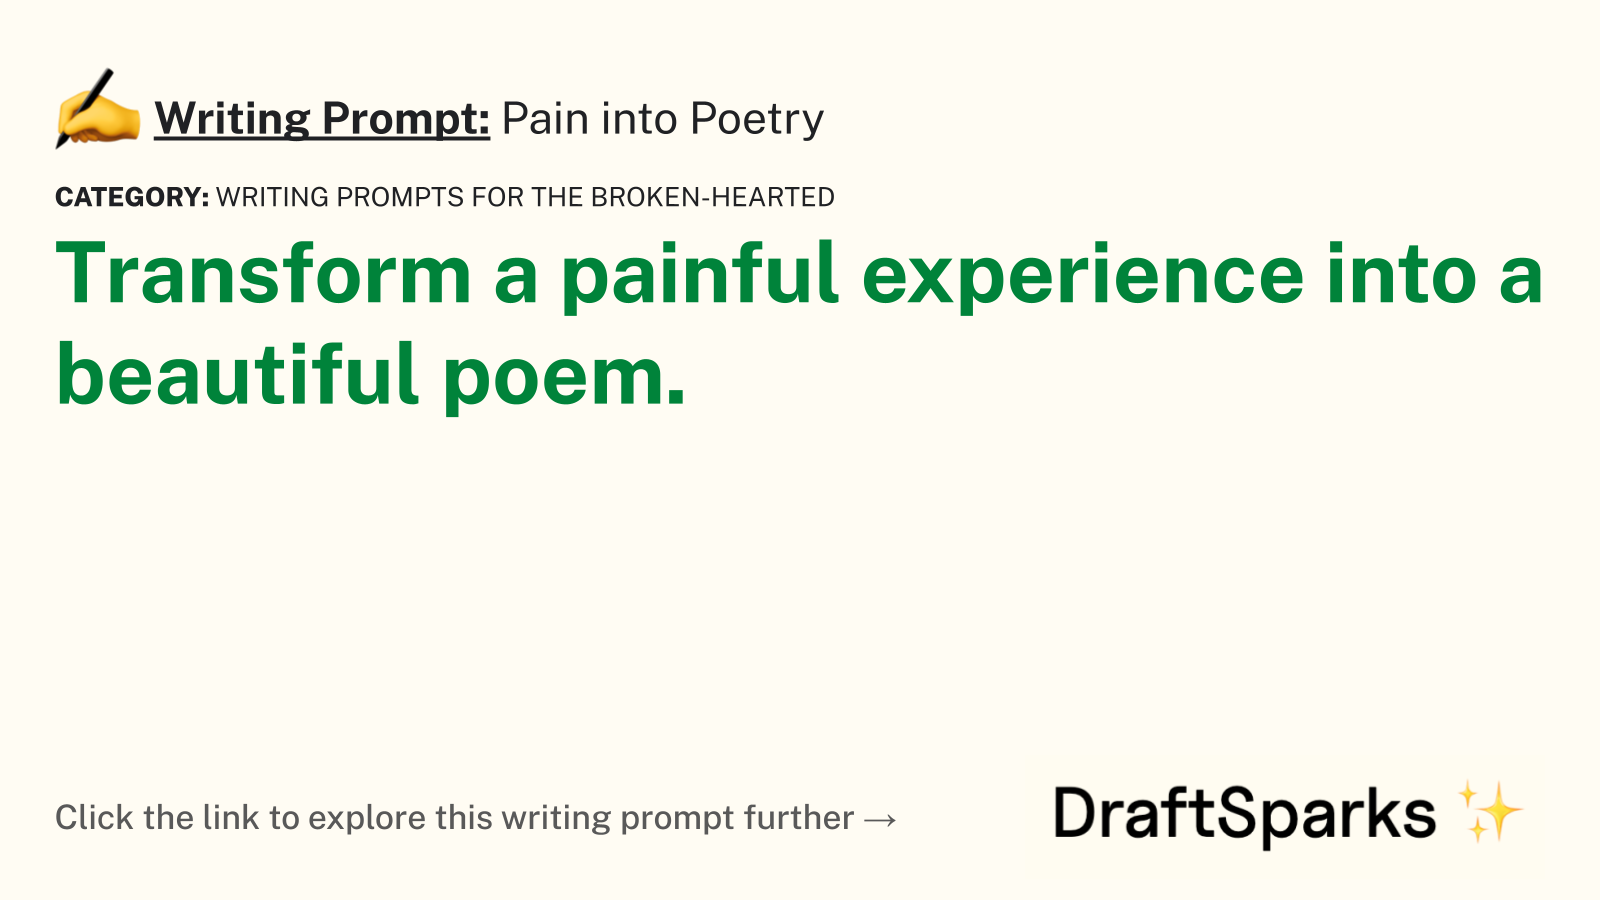 Pain into Poetry